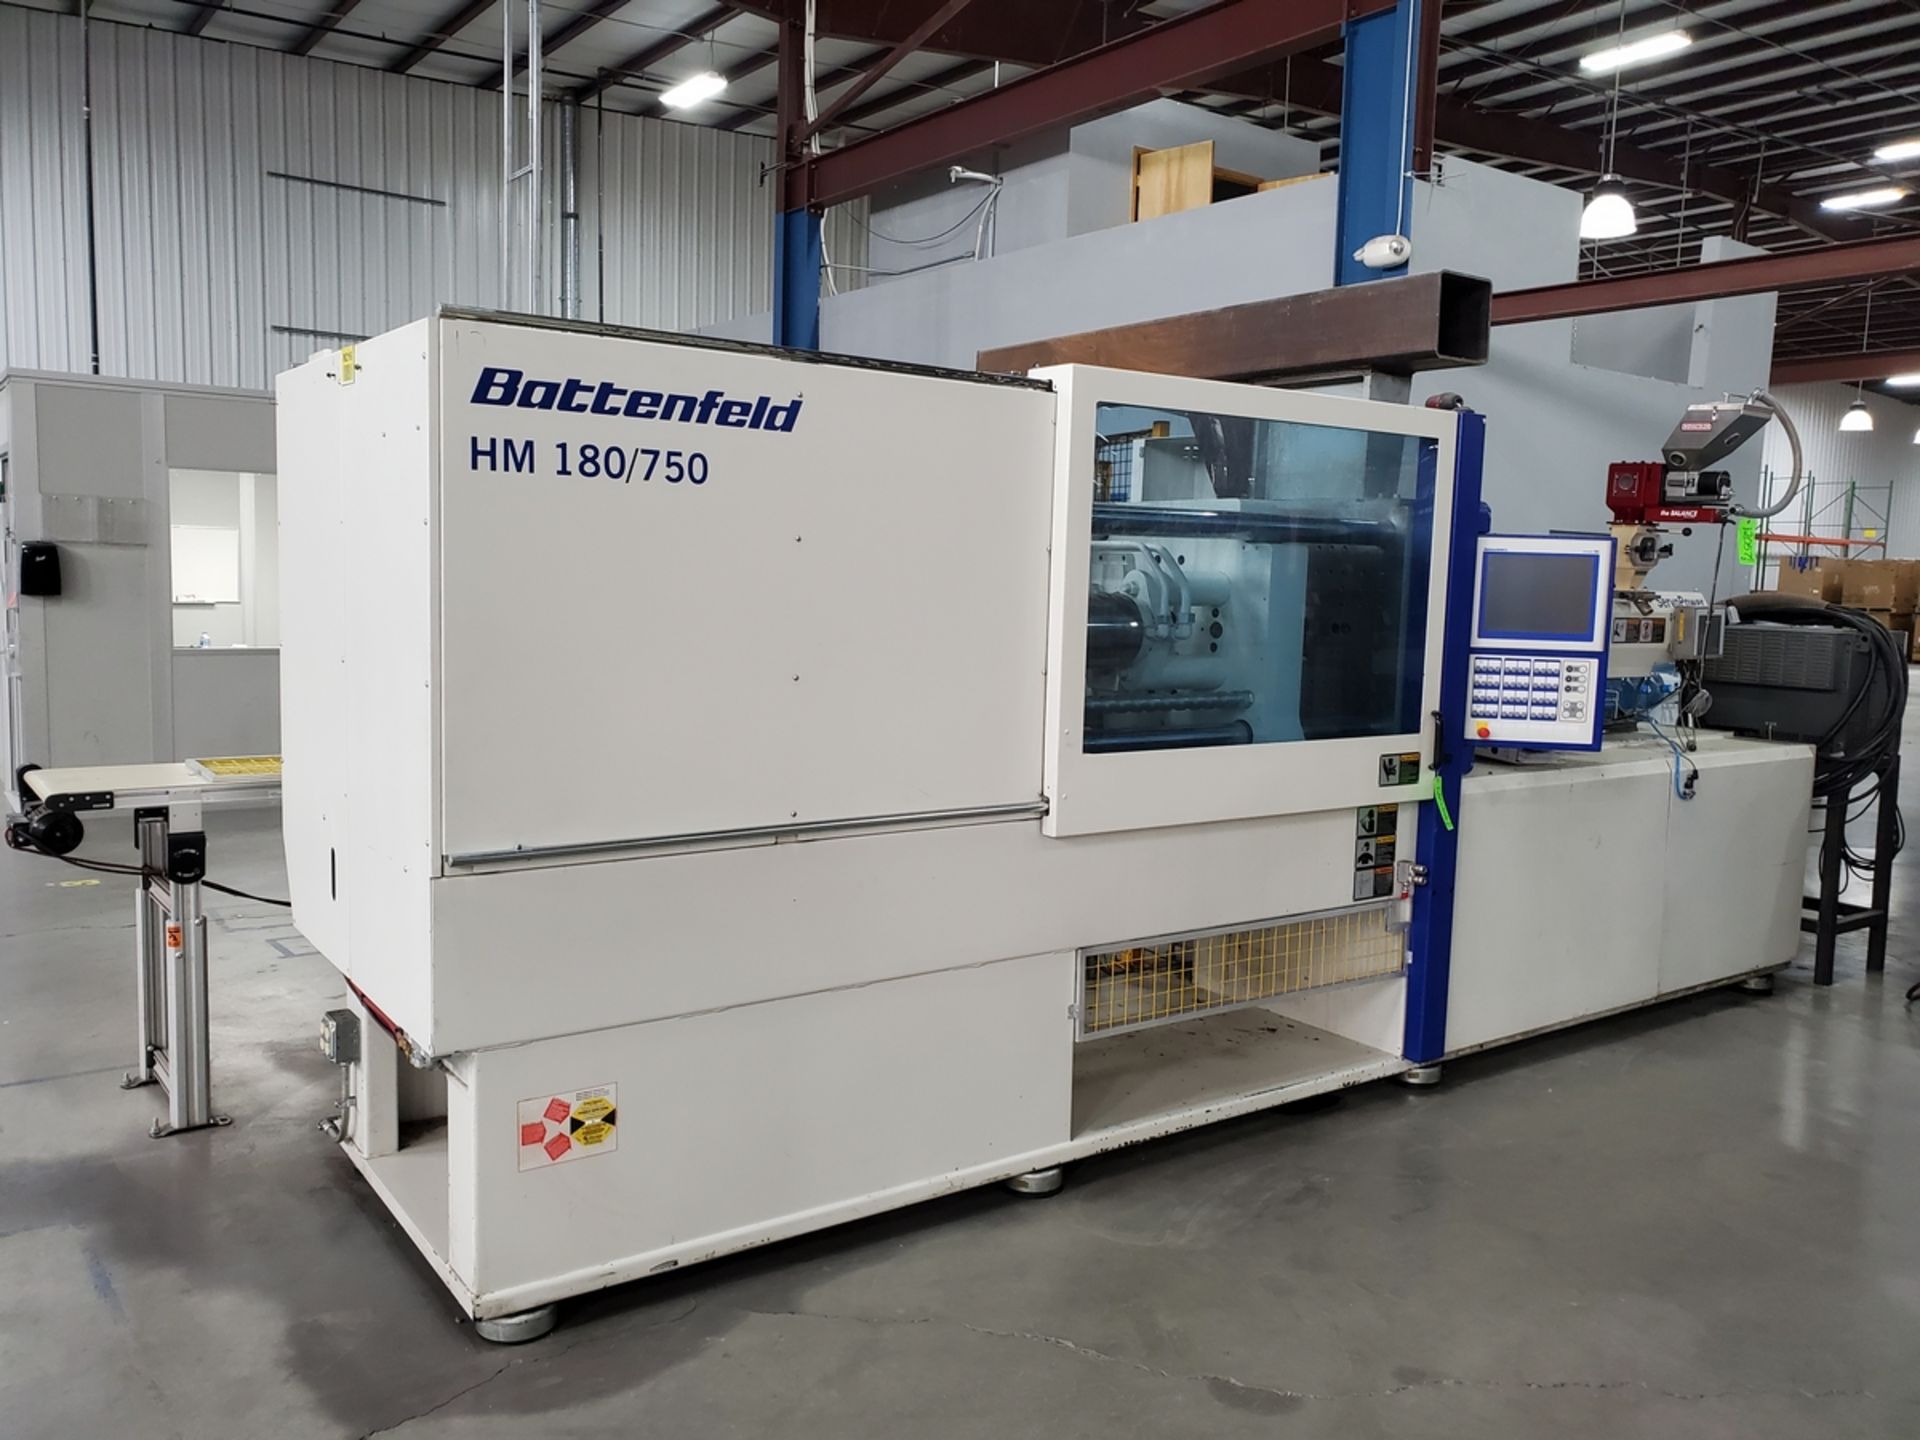 Battenfeld HM 180/750, 180 Ton Injection Molding Machine, New in 2013 - Image 12 of 12